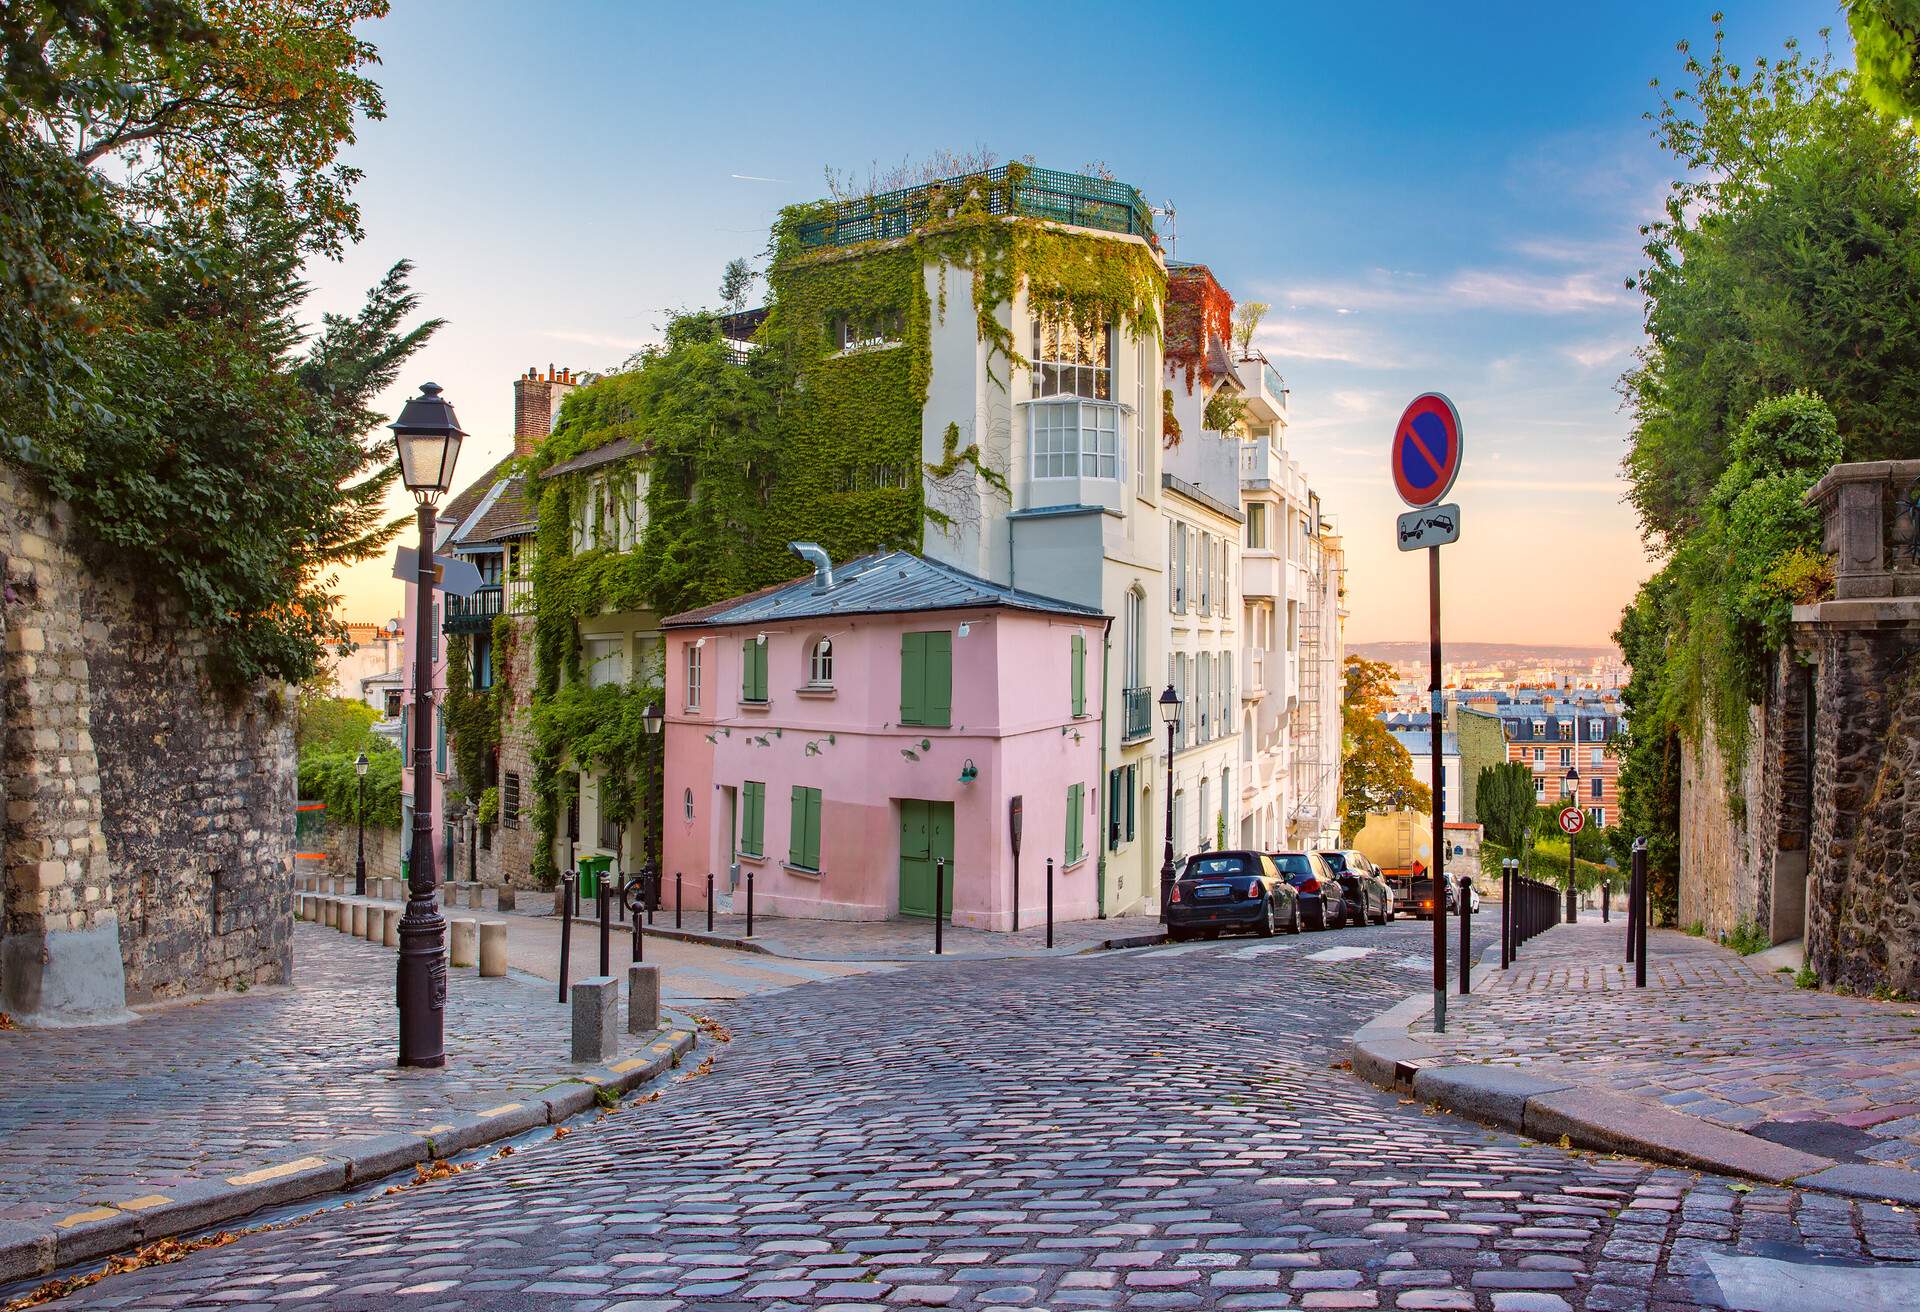 Charming quiet cobblestone street on a hilltop in Montmartre in Paris with a small pink house in the middle and a view of Paris in the background